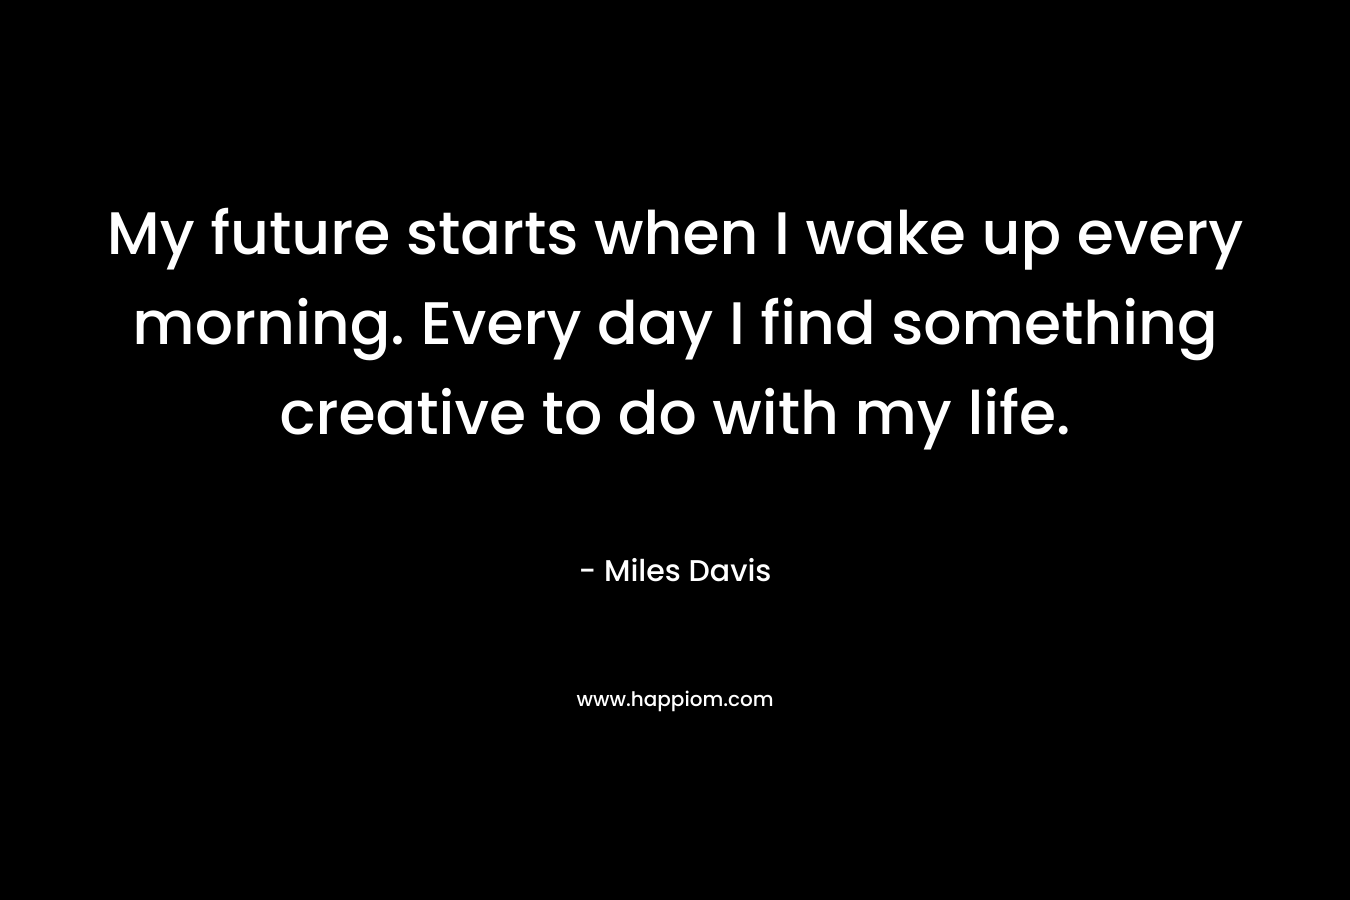 My future starts when I wake up every morning. Every day I find something creative to do with my life. – Miles Davis